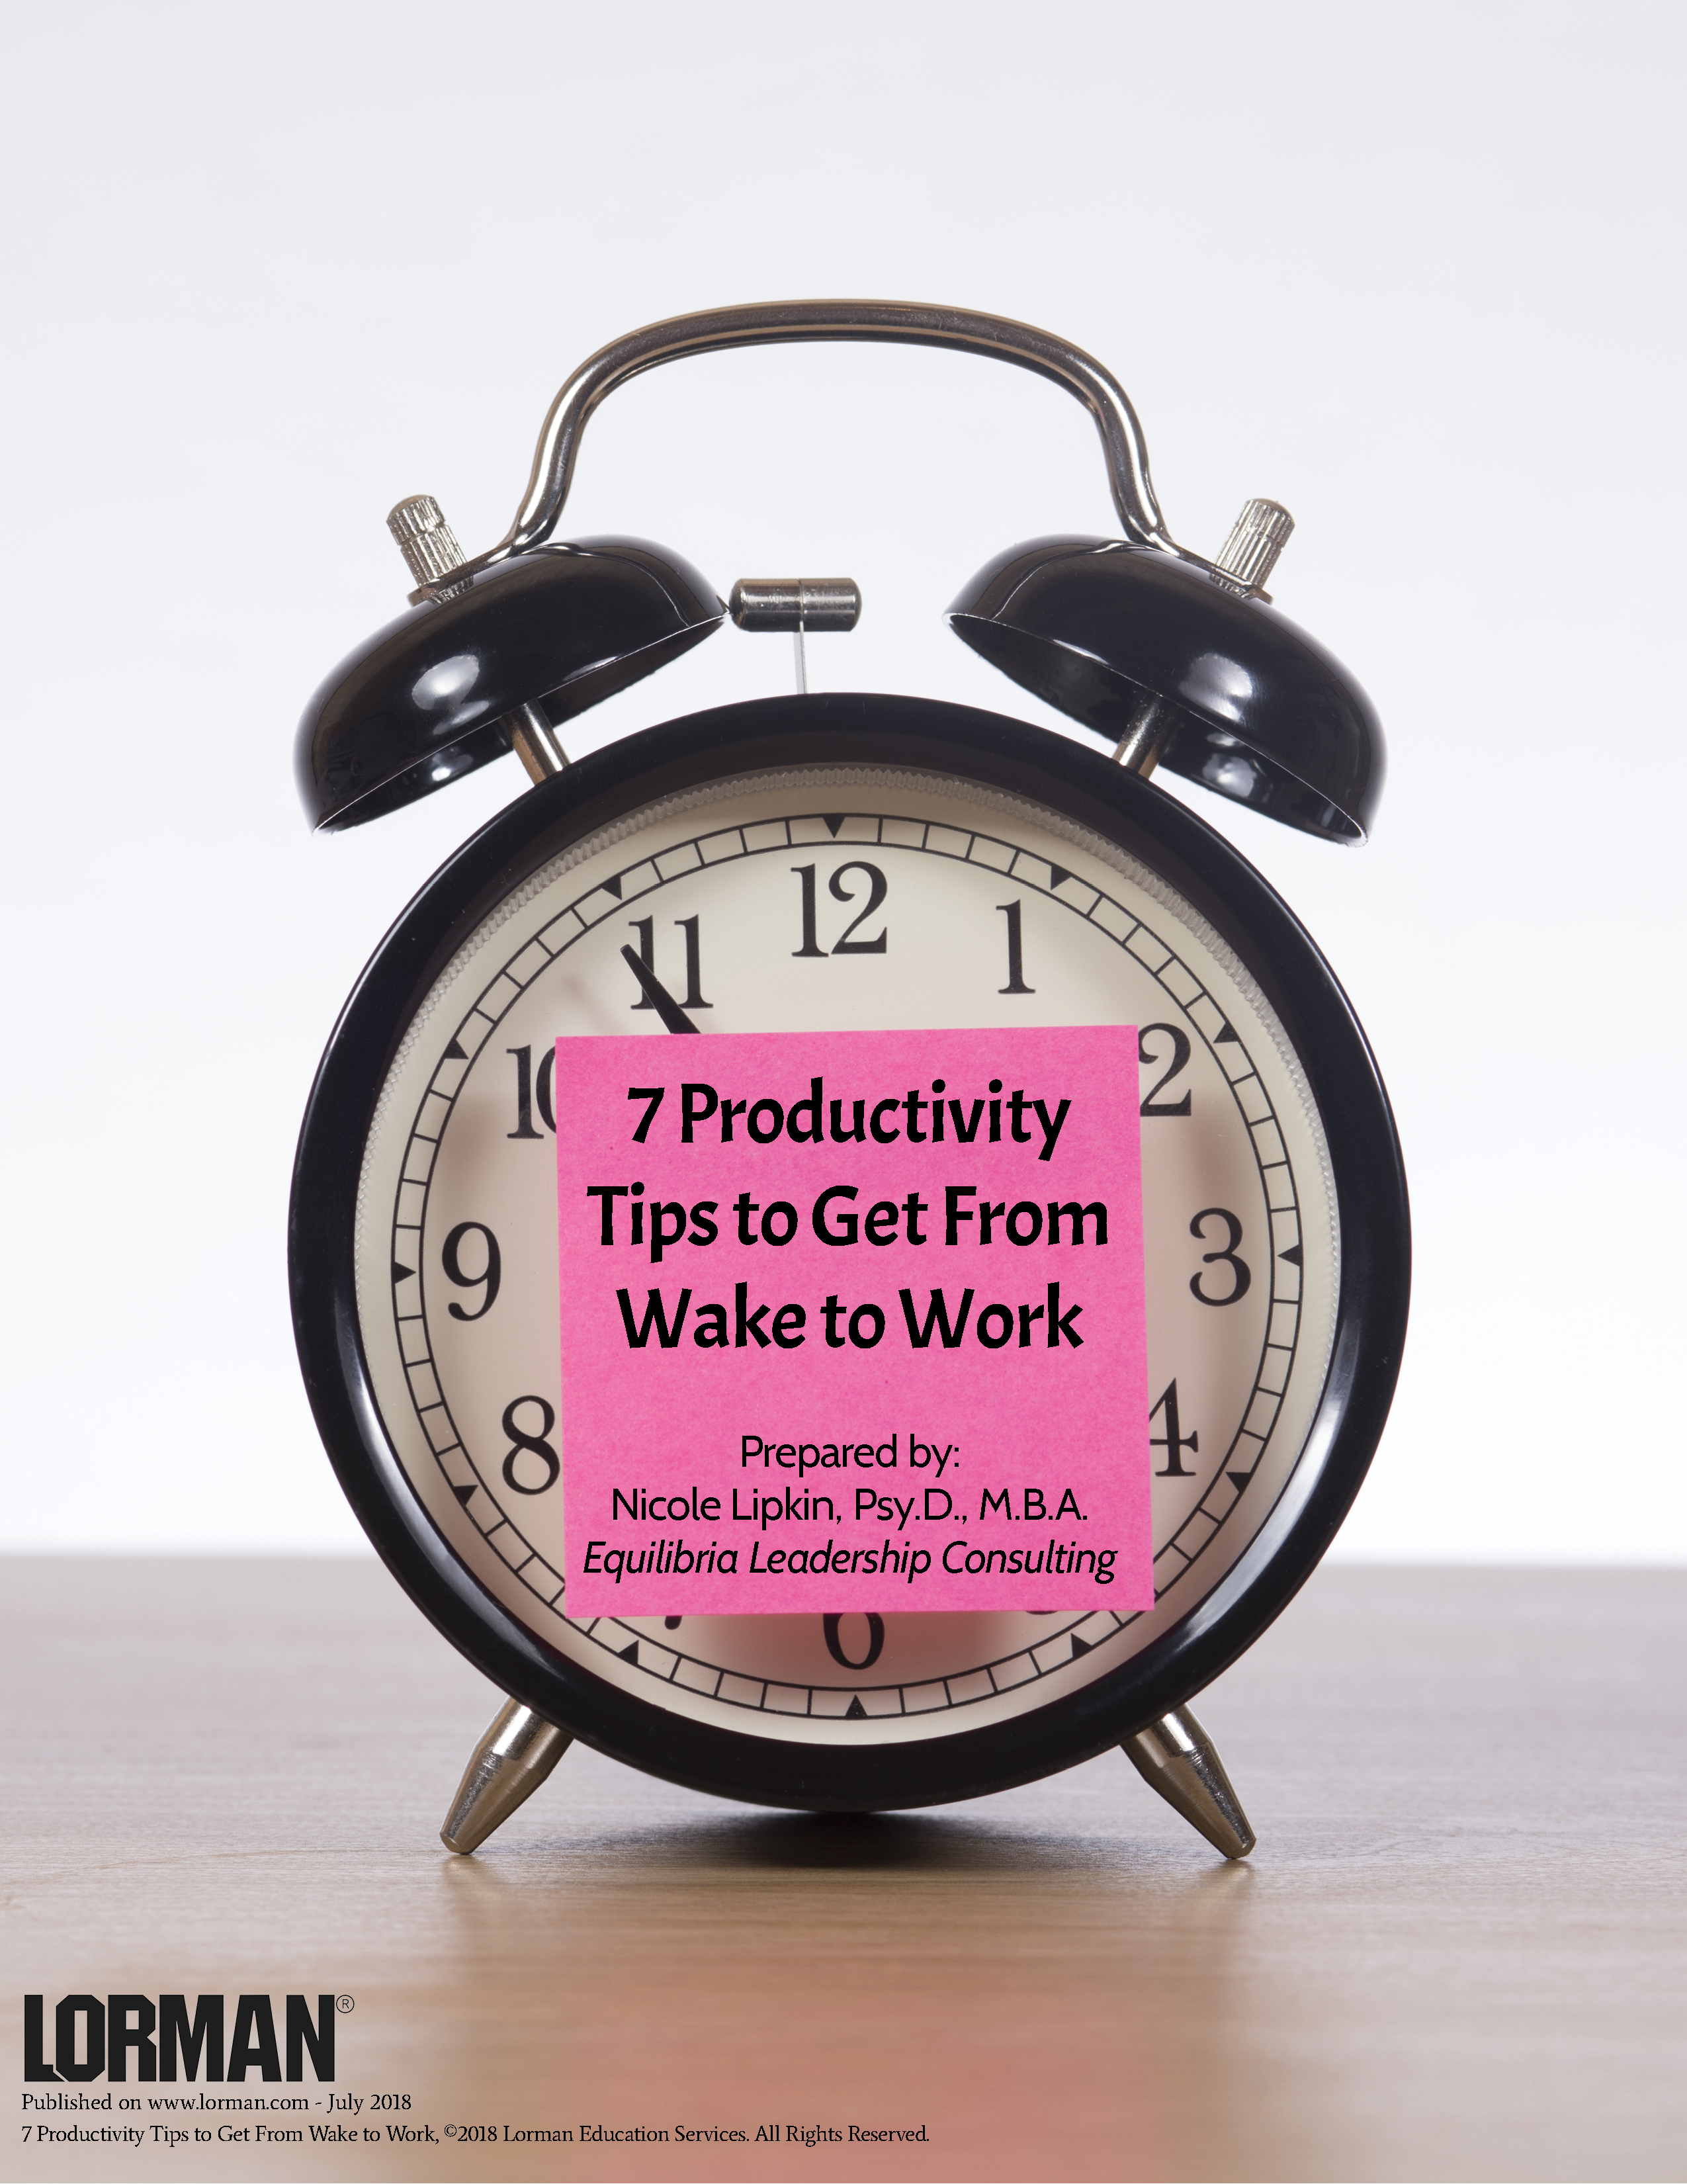 7 Productivity Tips to Get From Wake to Work